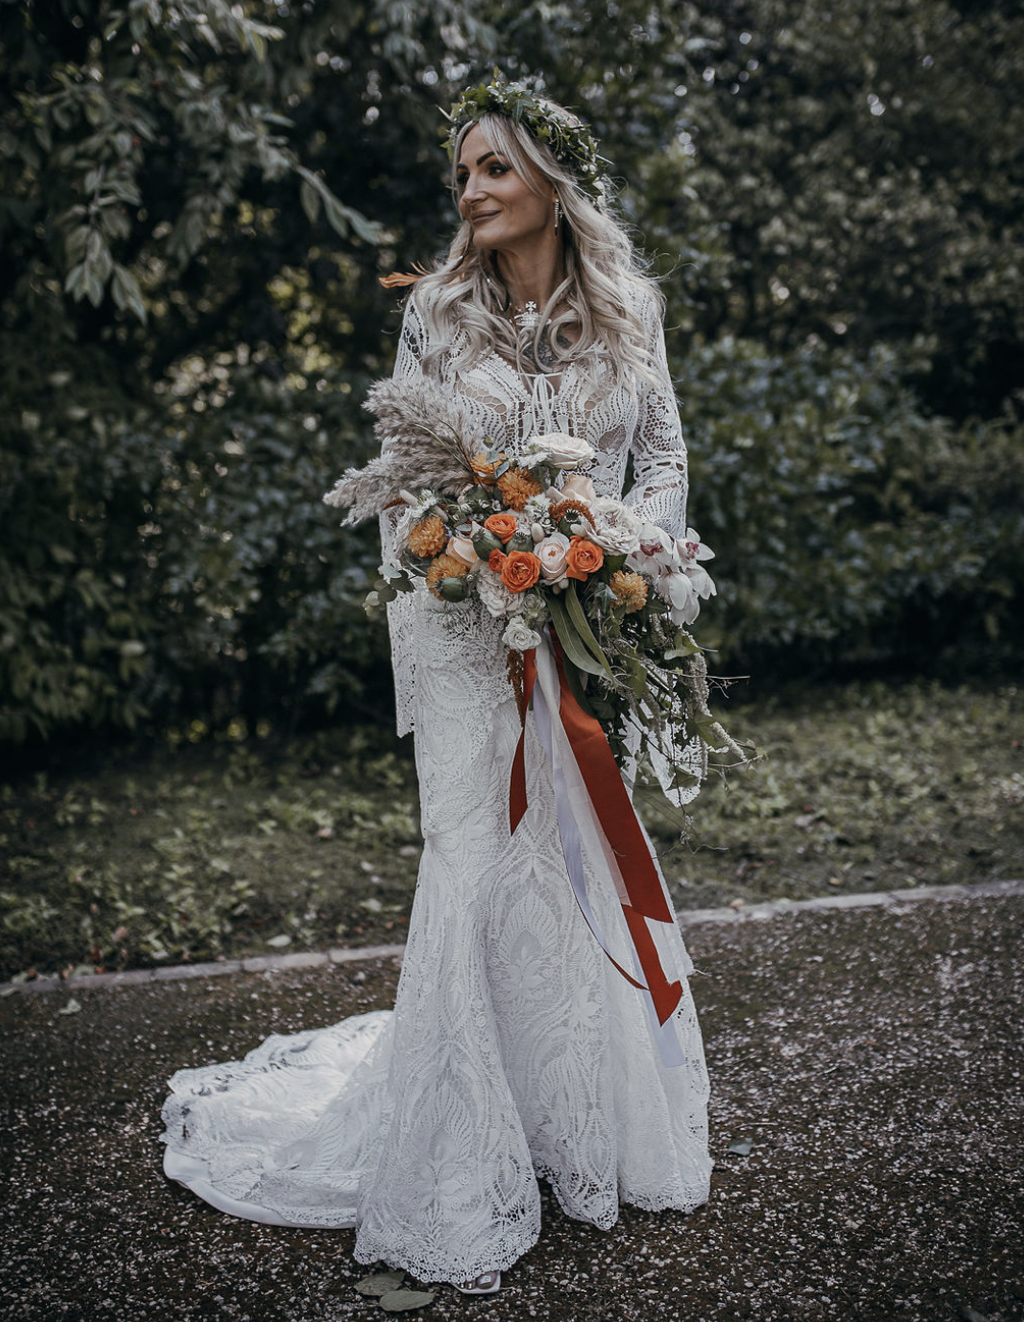  A bride wearing a long sleeved cream wedding dress is stood outside holding an original floral creation, filled with dried and natural flowers. The bridal bouquet is tied with orange and white ribbons to match the flowers. The bride is wearing a flo